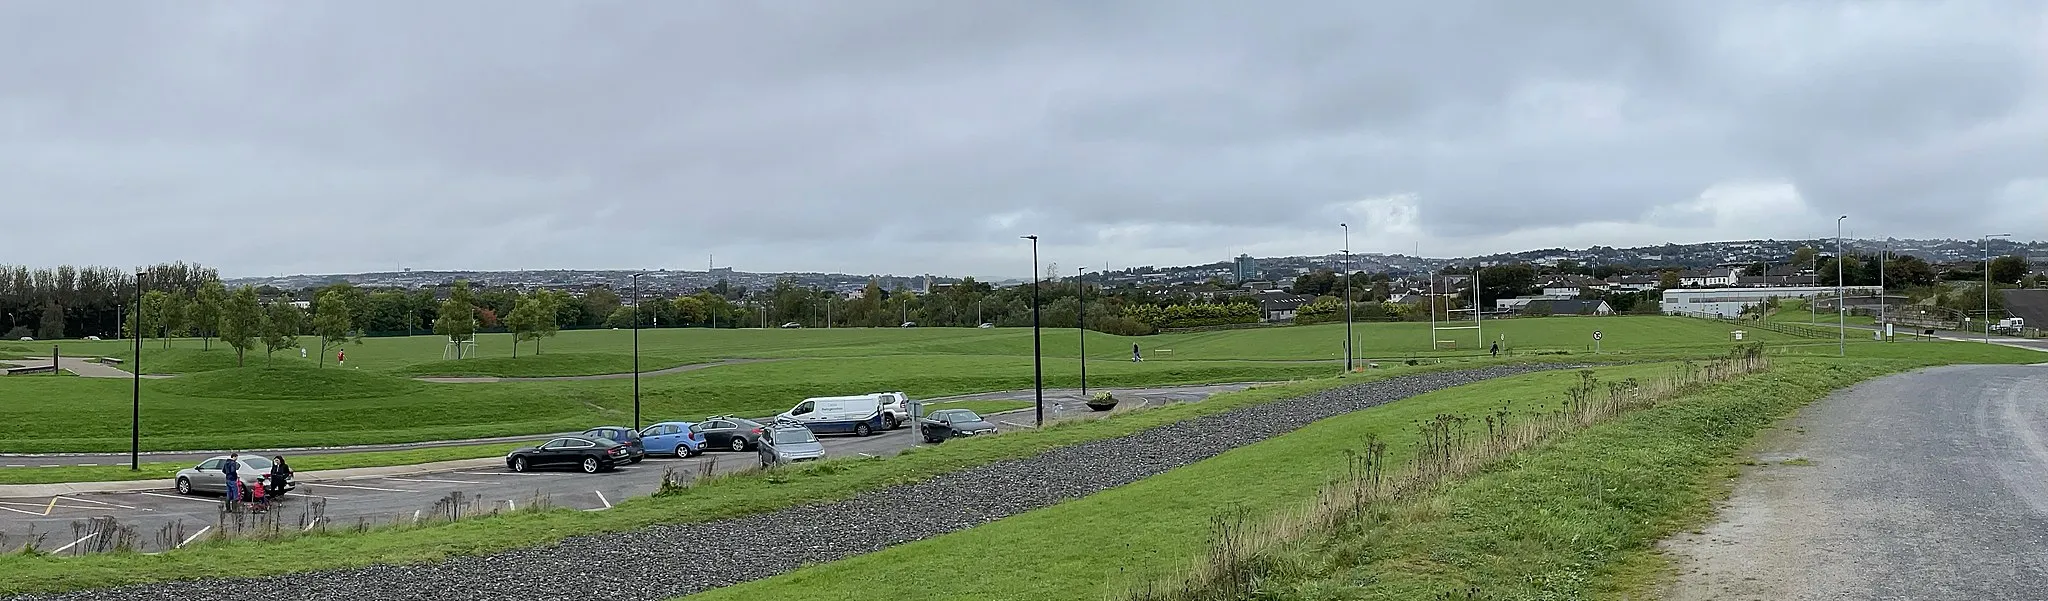 Photo showing: Tramore Valley Park, Cork, Ireland. View of carpark, sports fields and BMX track